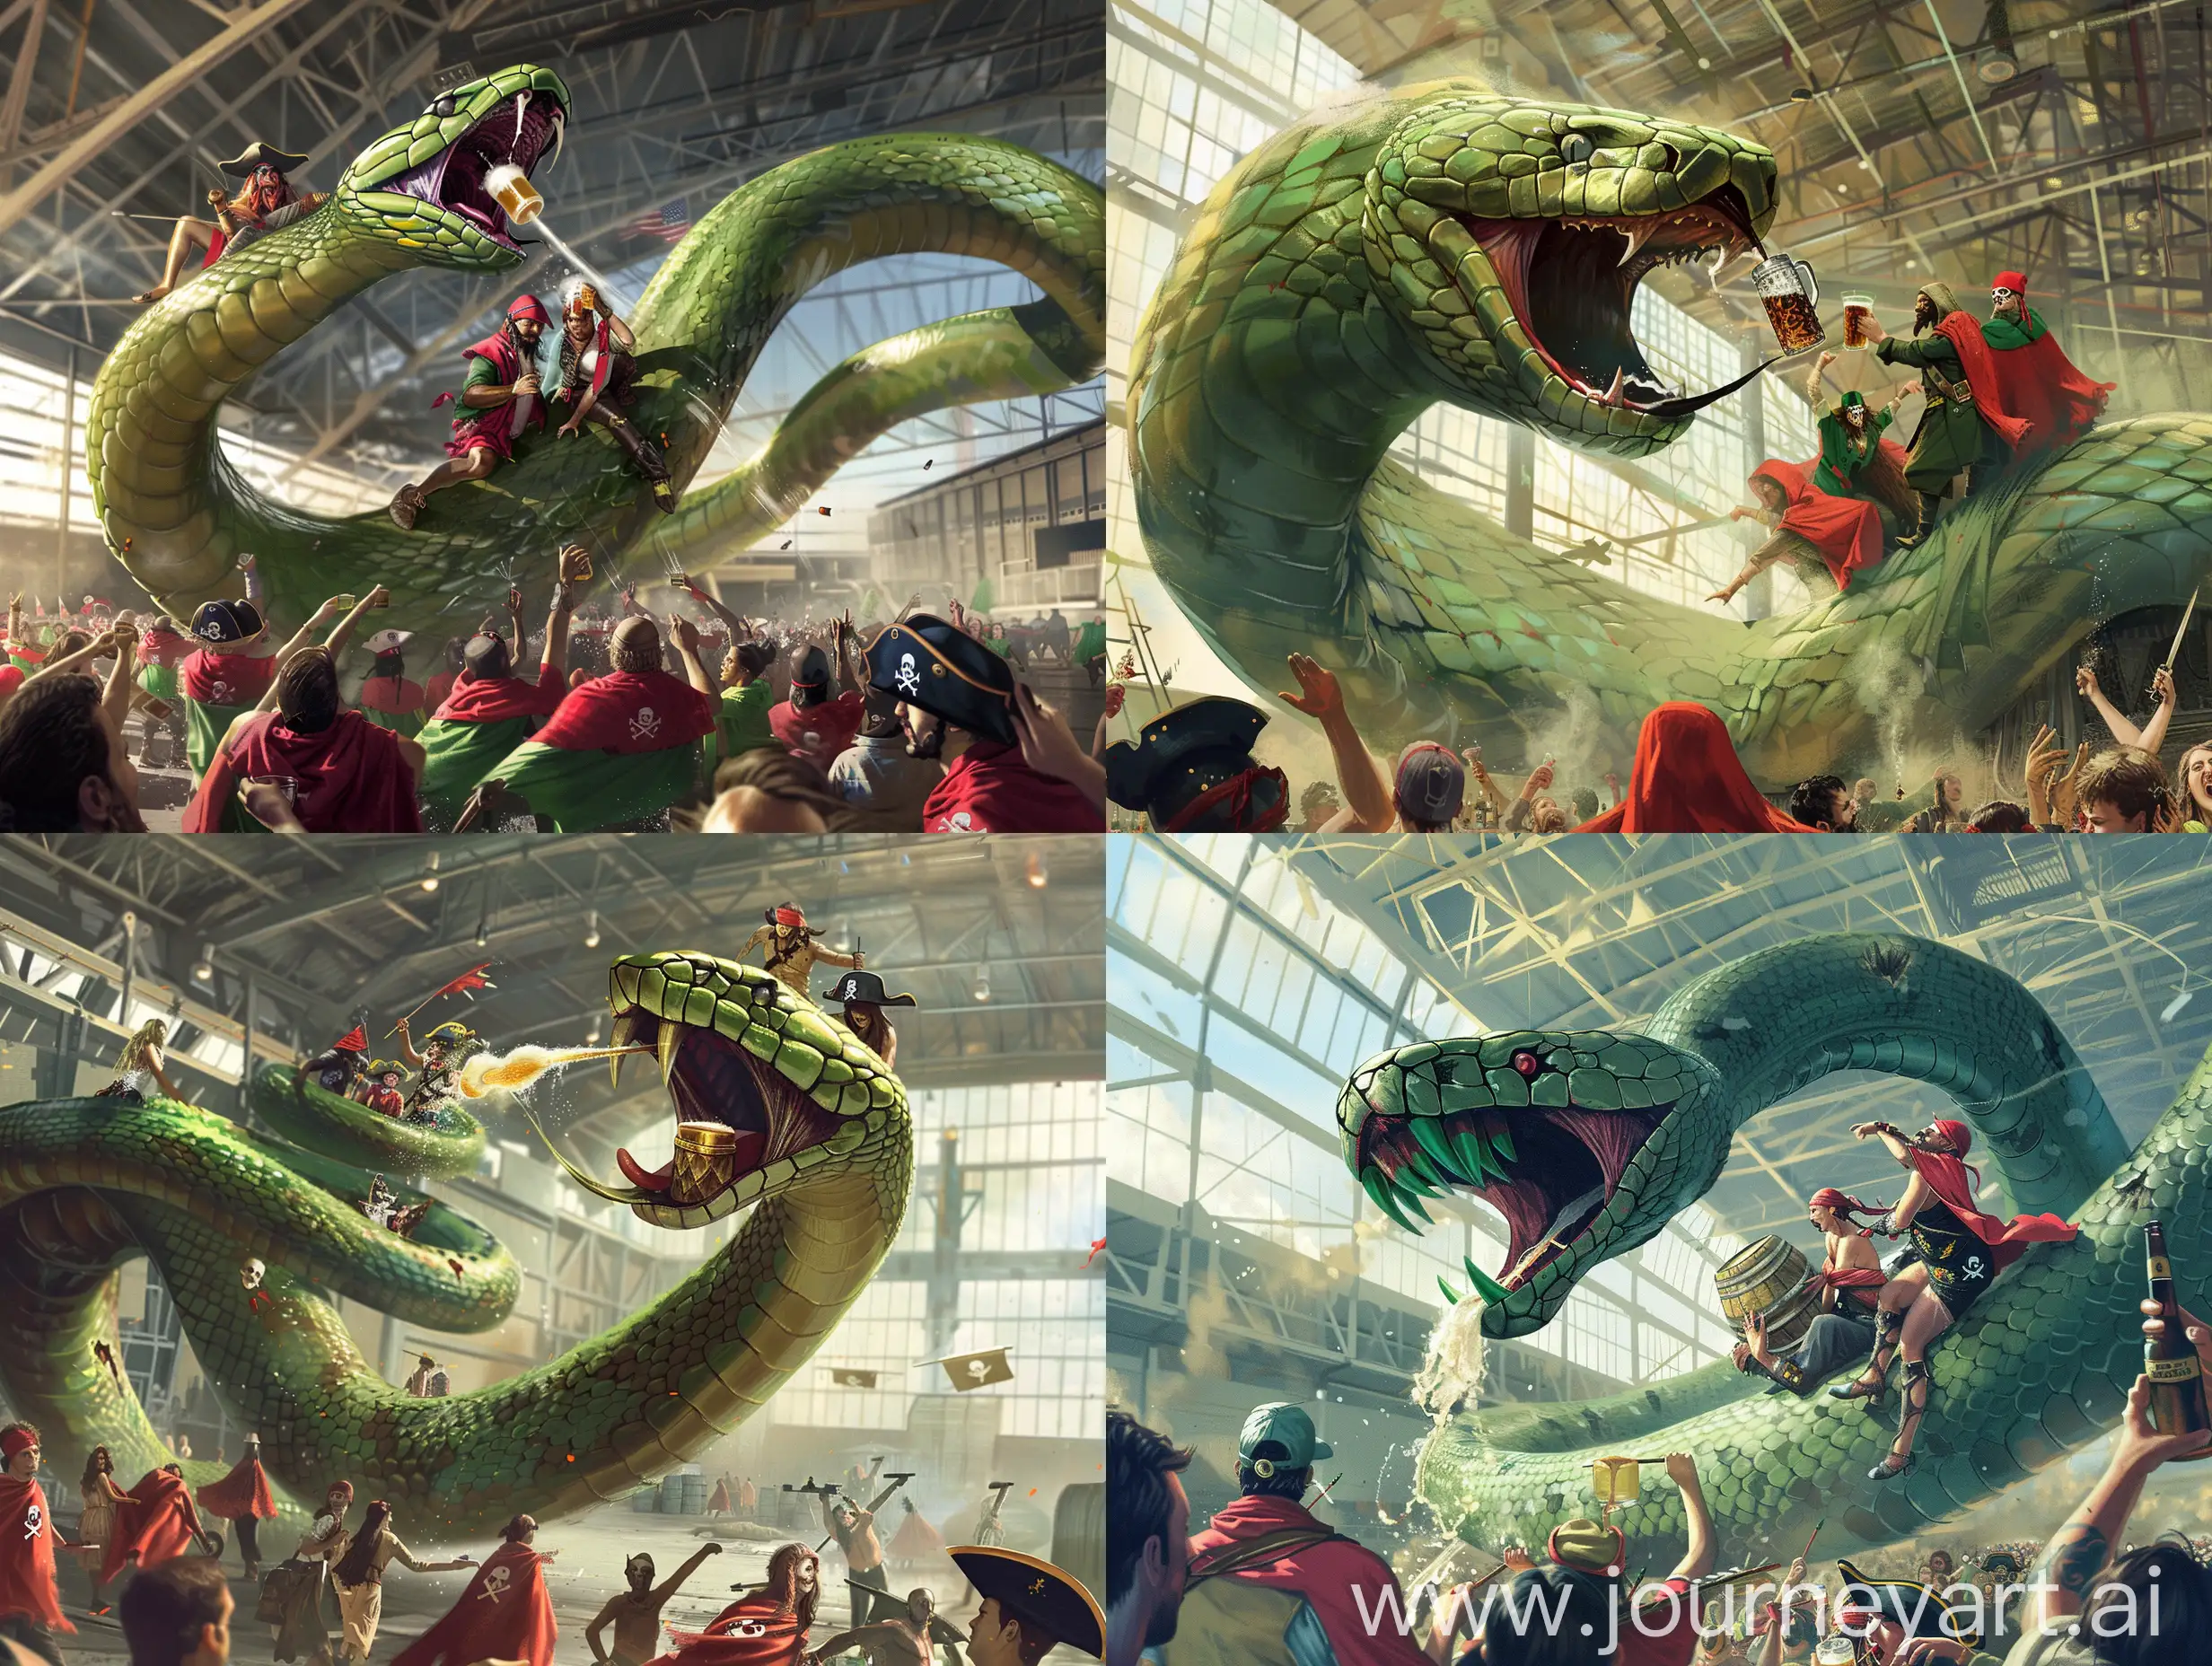 A giant green snake spitting beer by his fangs on a crowd having a party in a modern hangar. There are people having (red capes with green borders) riding the snake. Pirates are making a cocktail on the head of the snake. 